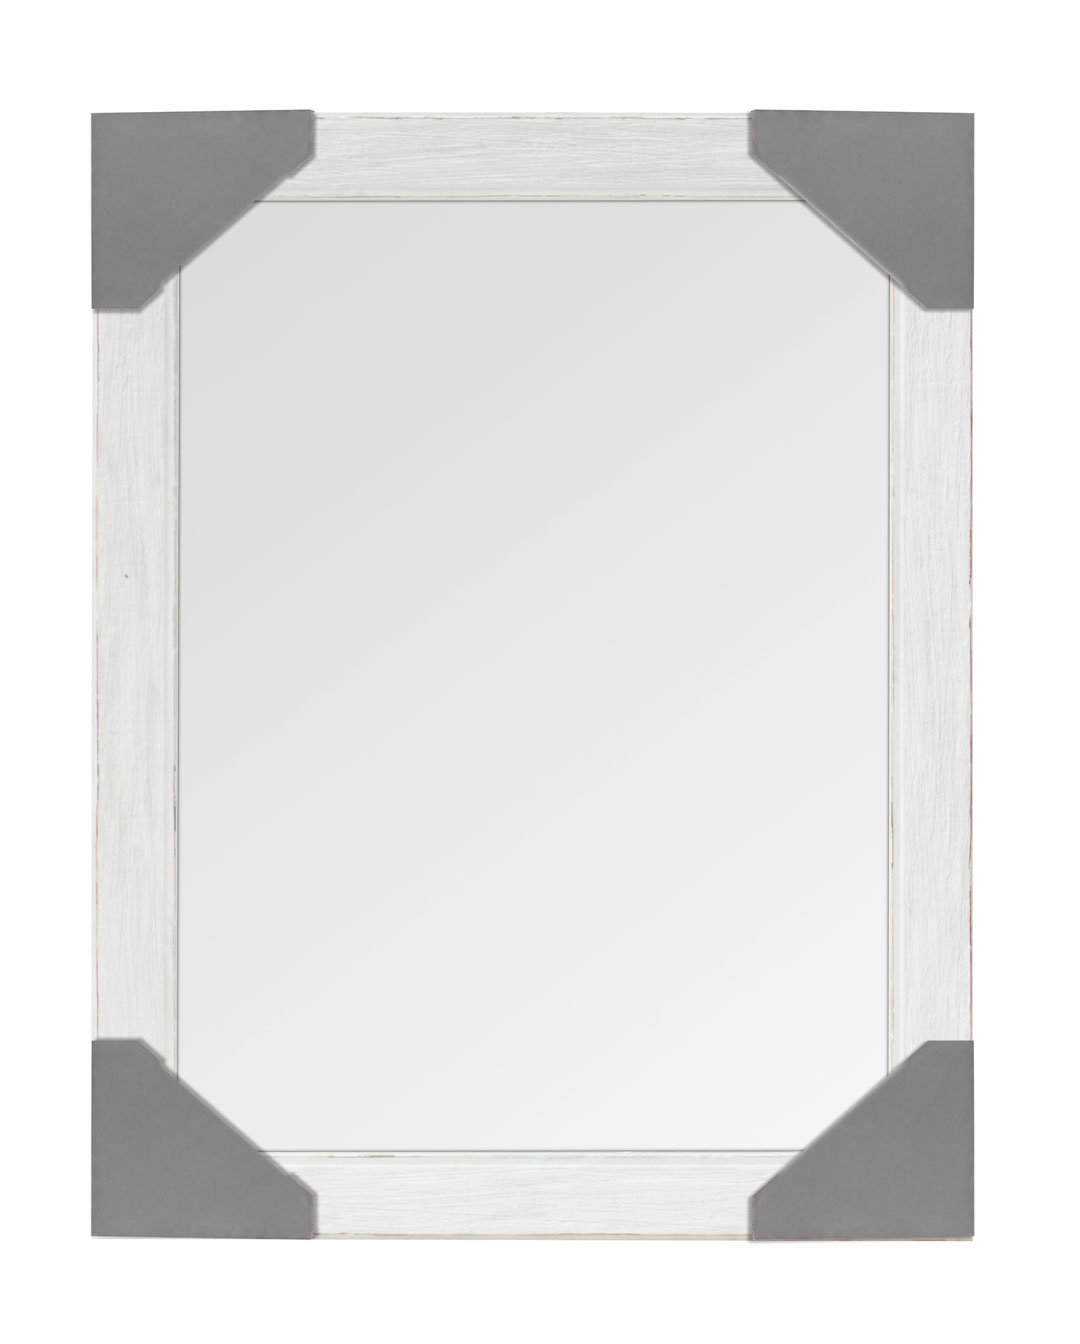 PS WALL MIRROR 40X50CM ASSORTED COLORS